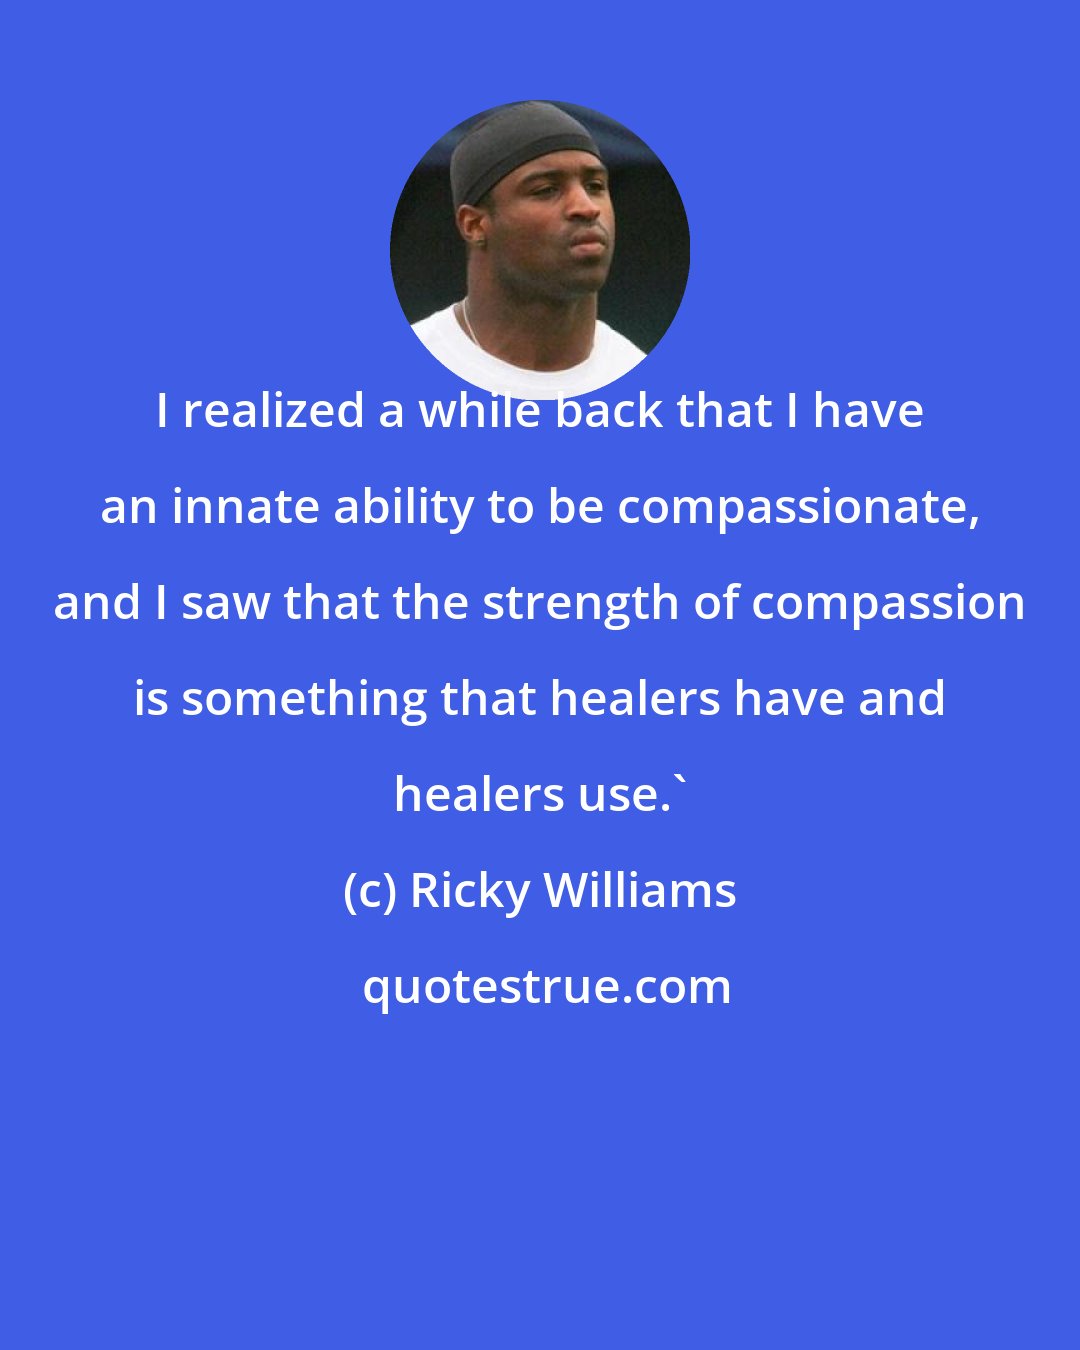 Ricky Williams: I realized a while back that I have an innate ability to be compassionate, and I saw that the strength of compassion is something that healers have and healers use.'